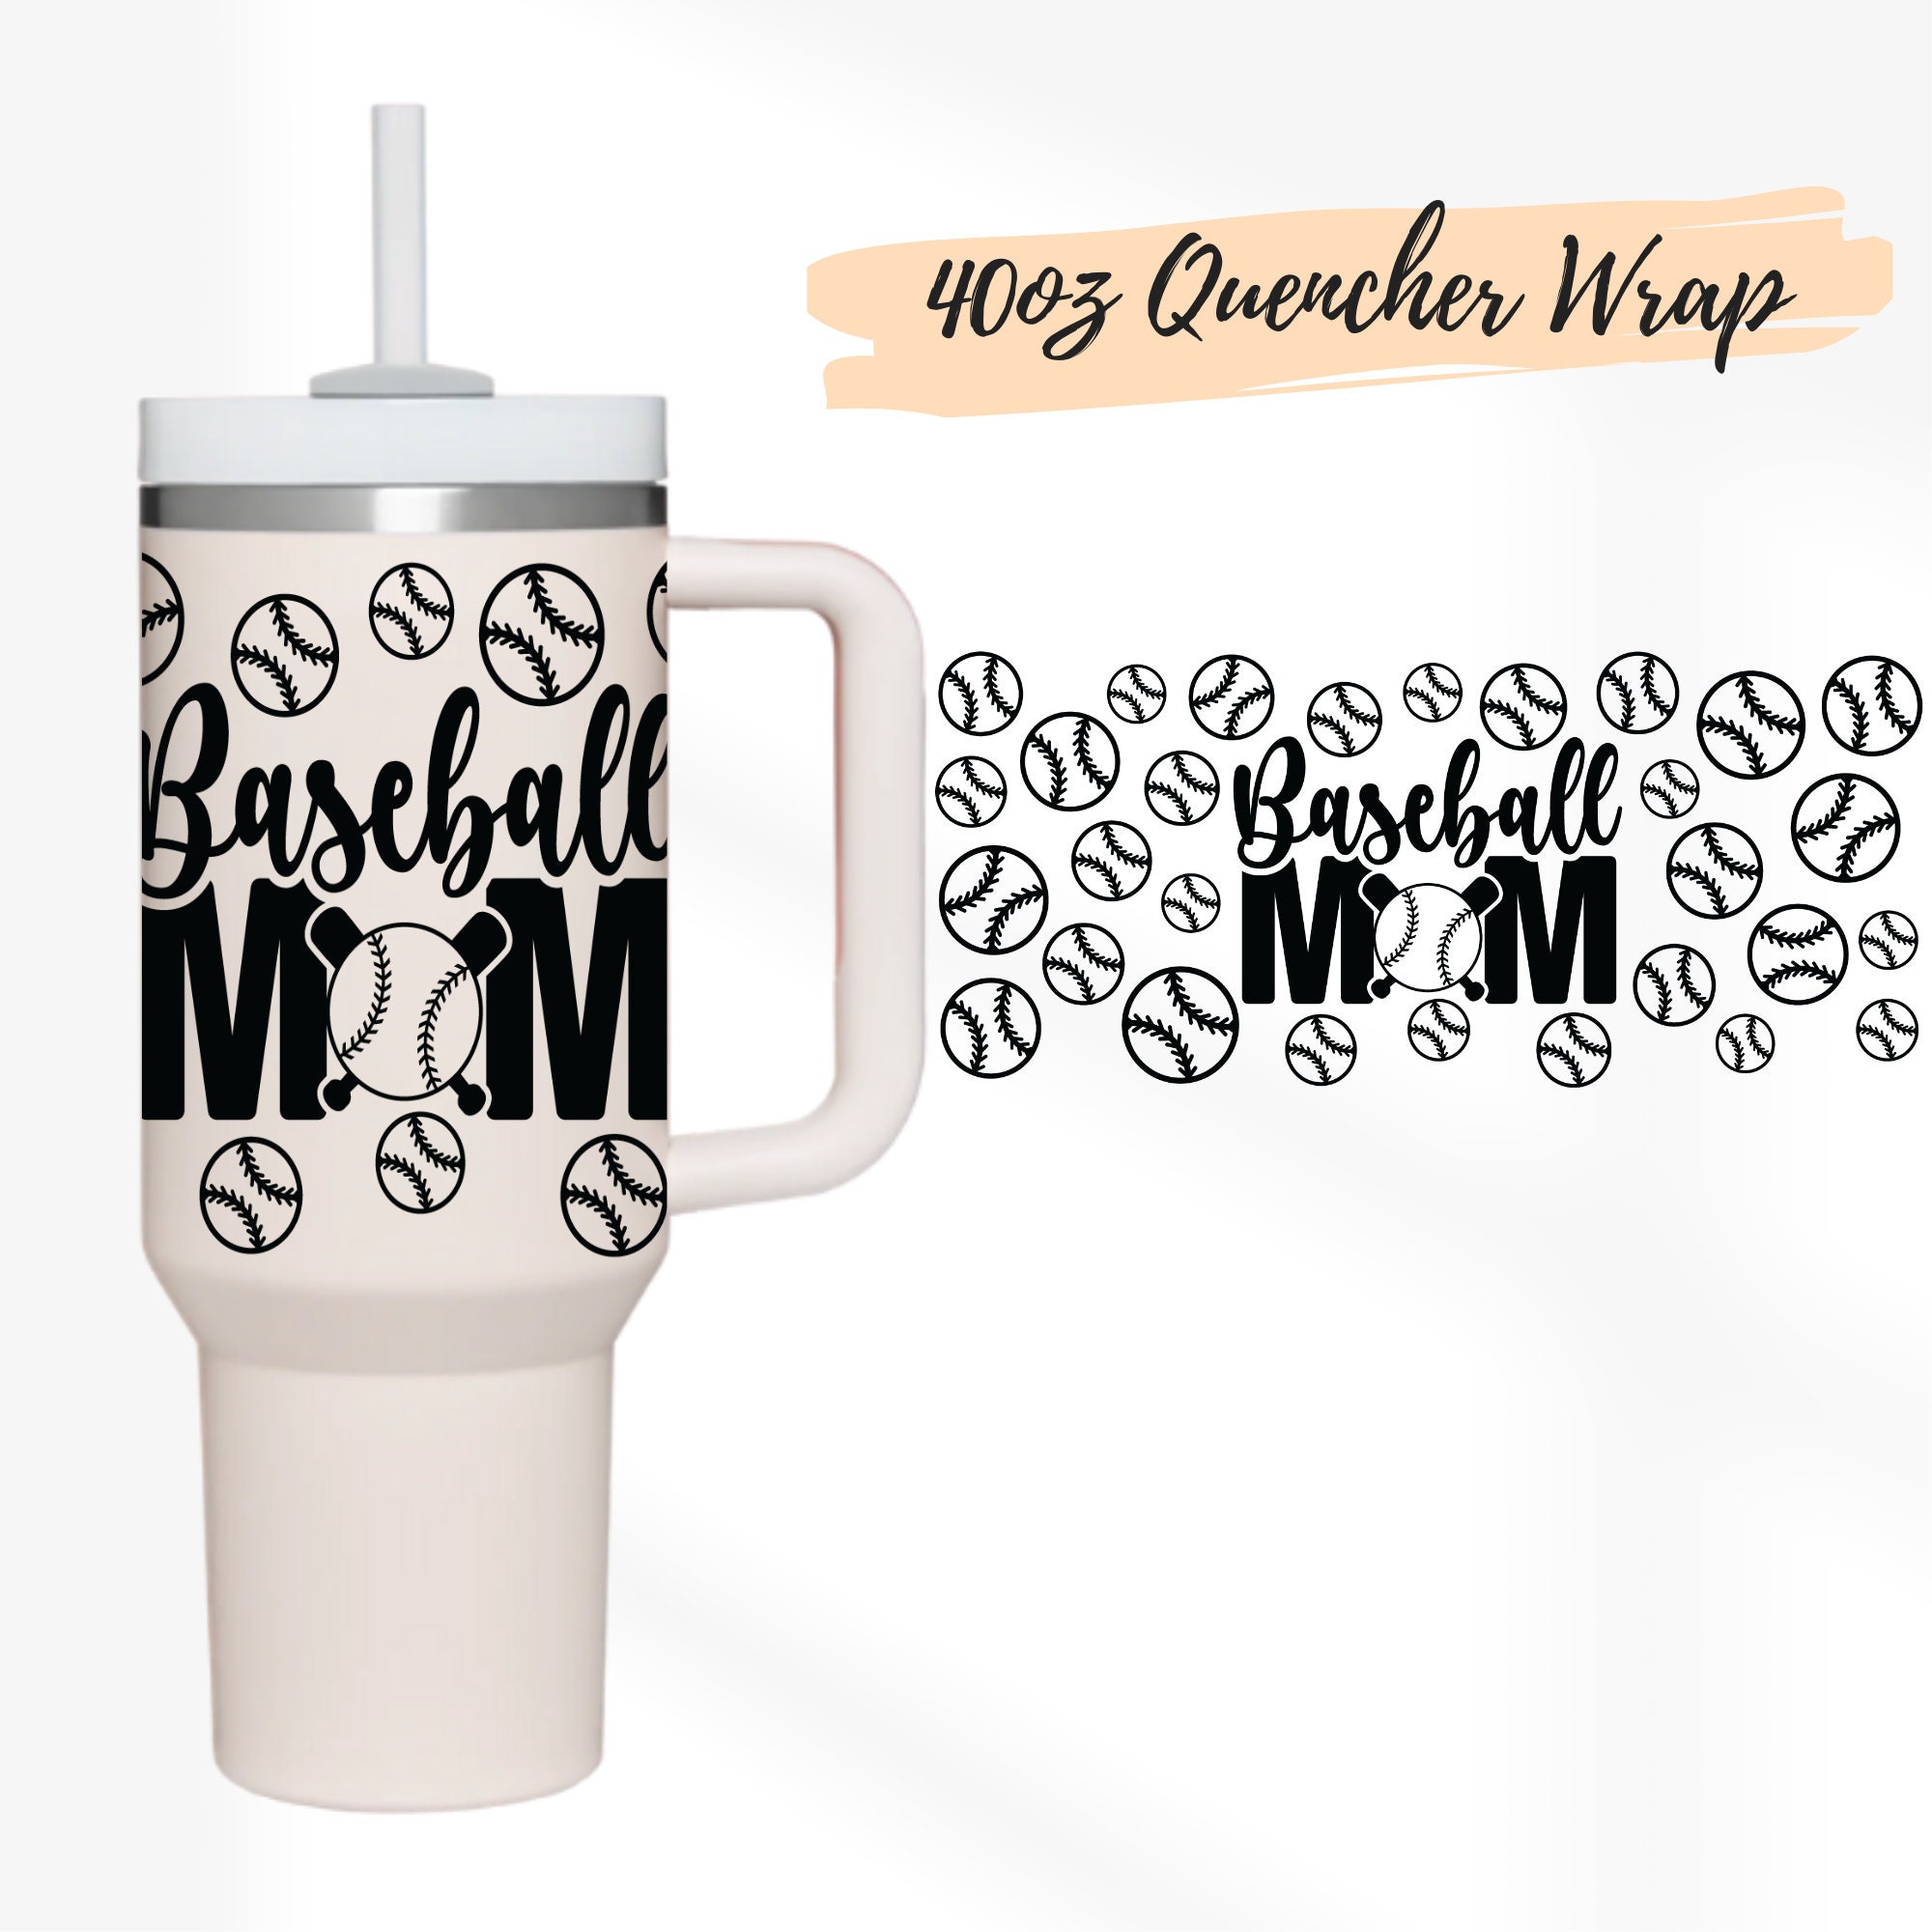 8 Designs 40oz Quencher Stanley Tumbler Wrap Cool Mom Moms Club